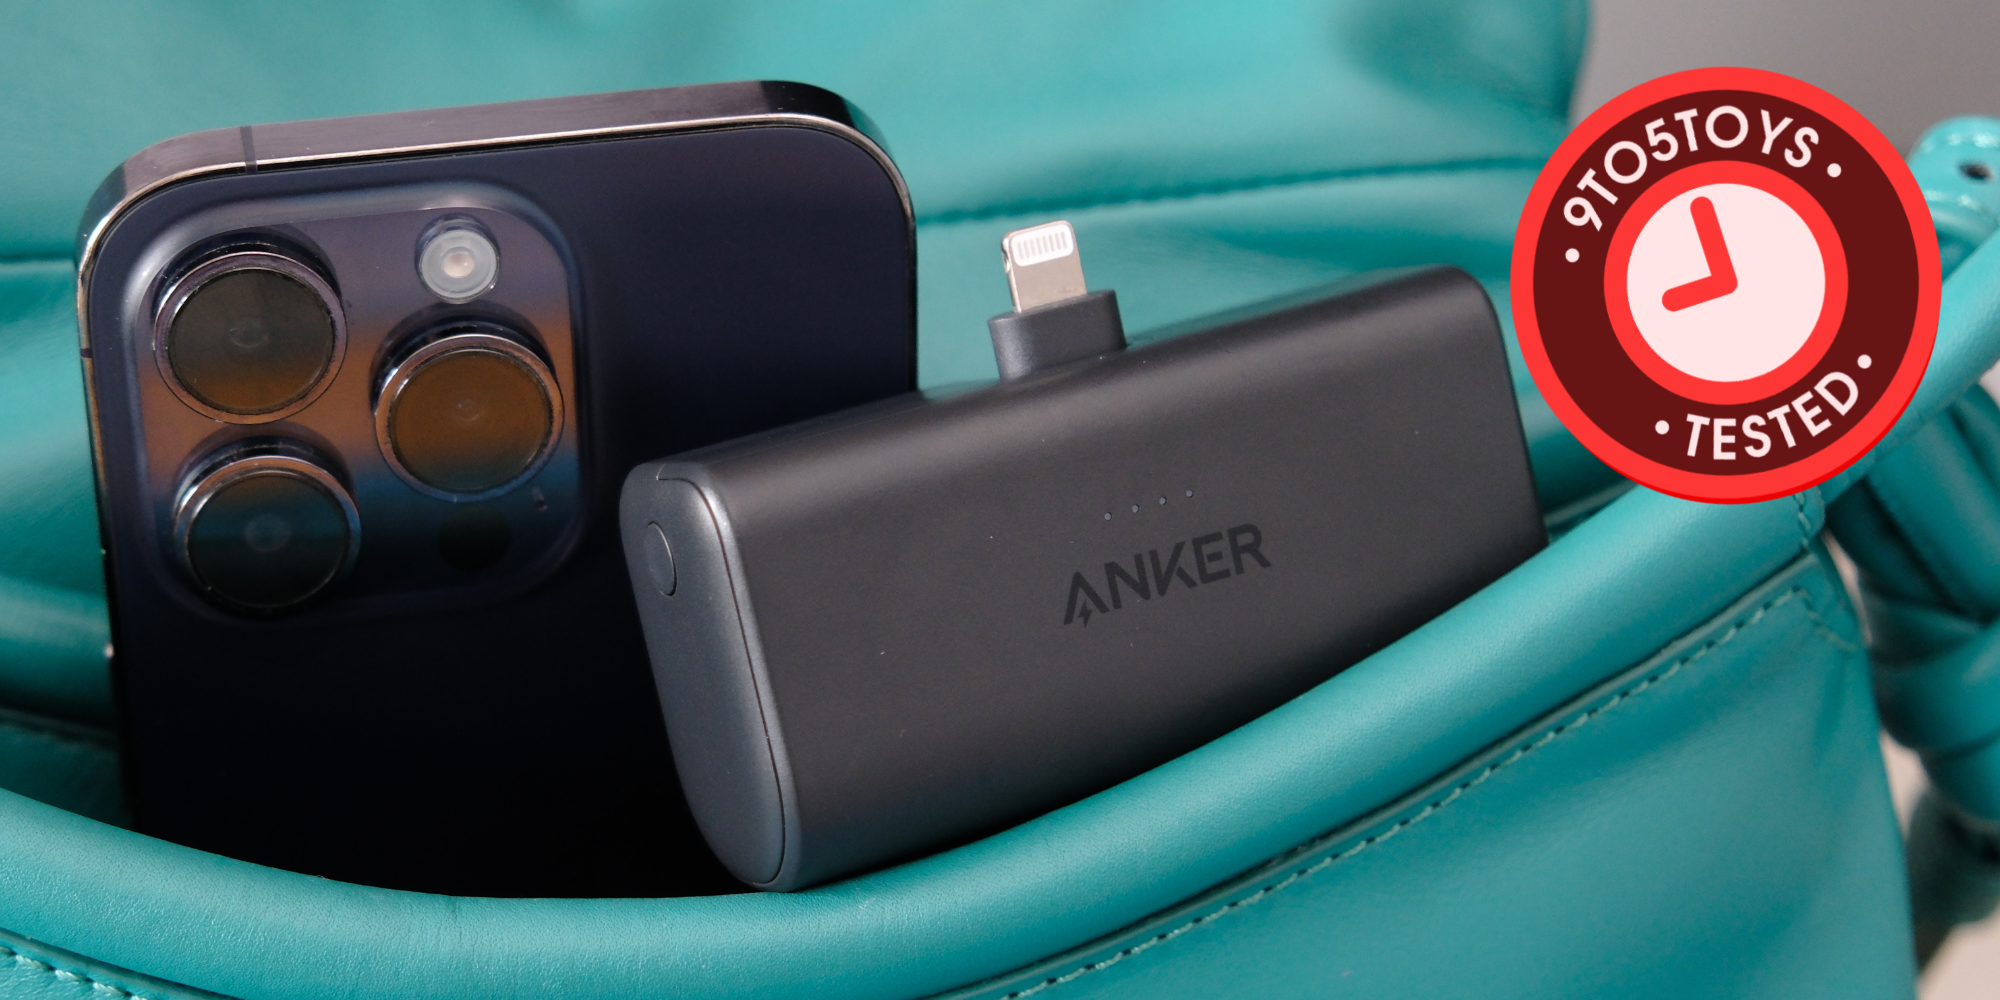 Anker Nano Power Bank, 10,000mAh Portable Charger with Built-in